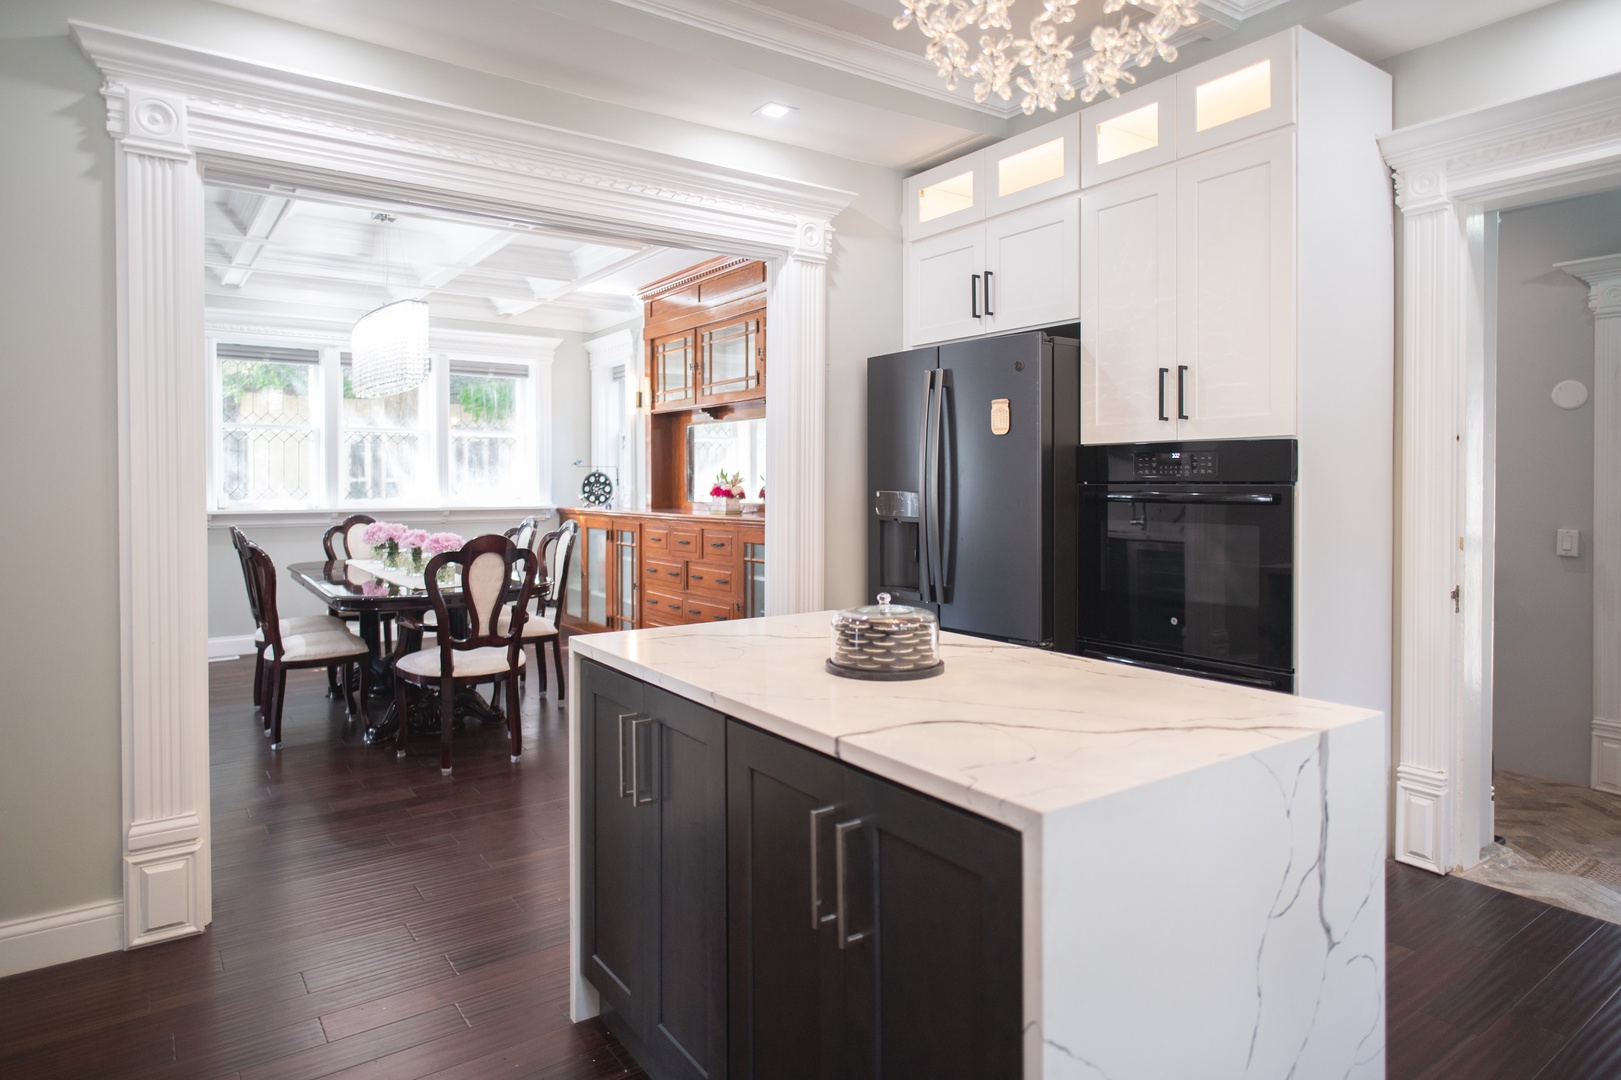 Enjoy the open flow between the main house’s kitchen & formal dining room